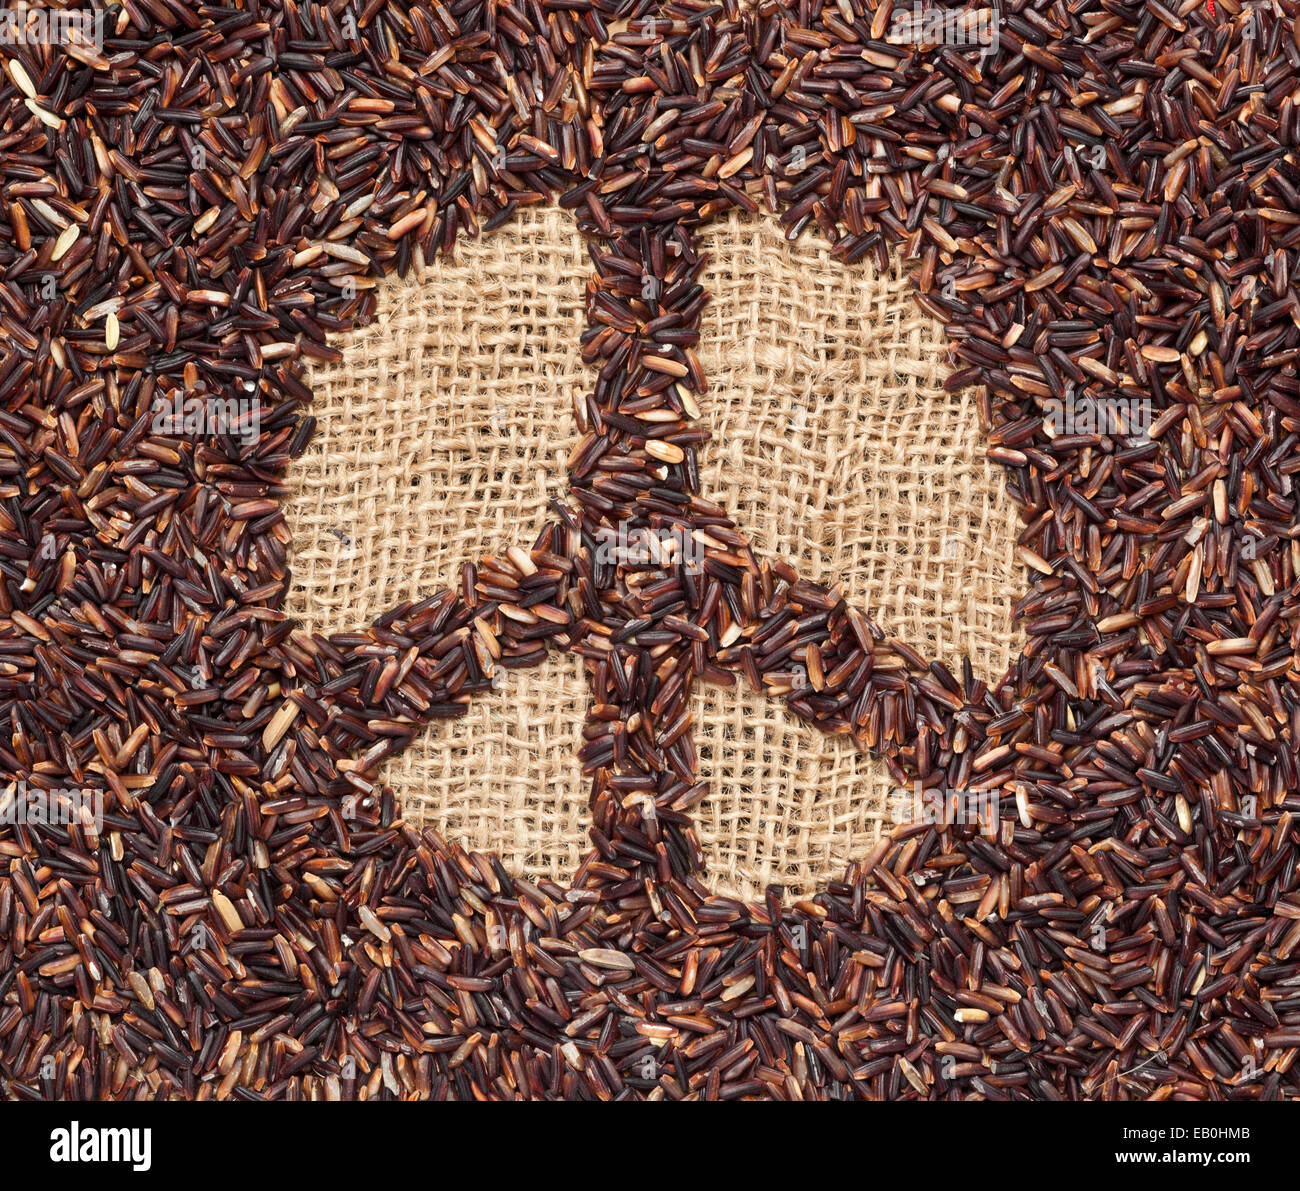 Red rice forming a peace symbol on burlap fabric Stock Photo